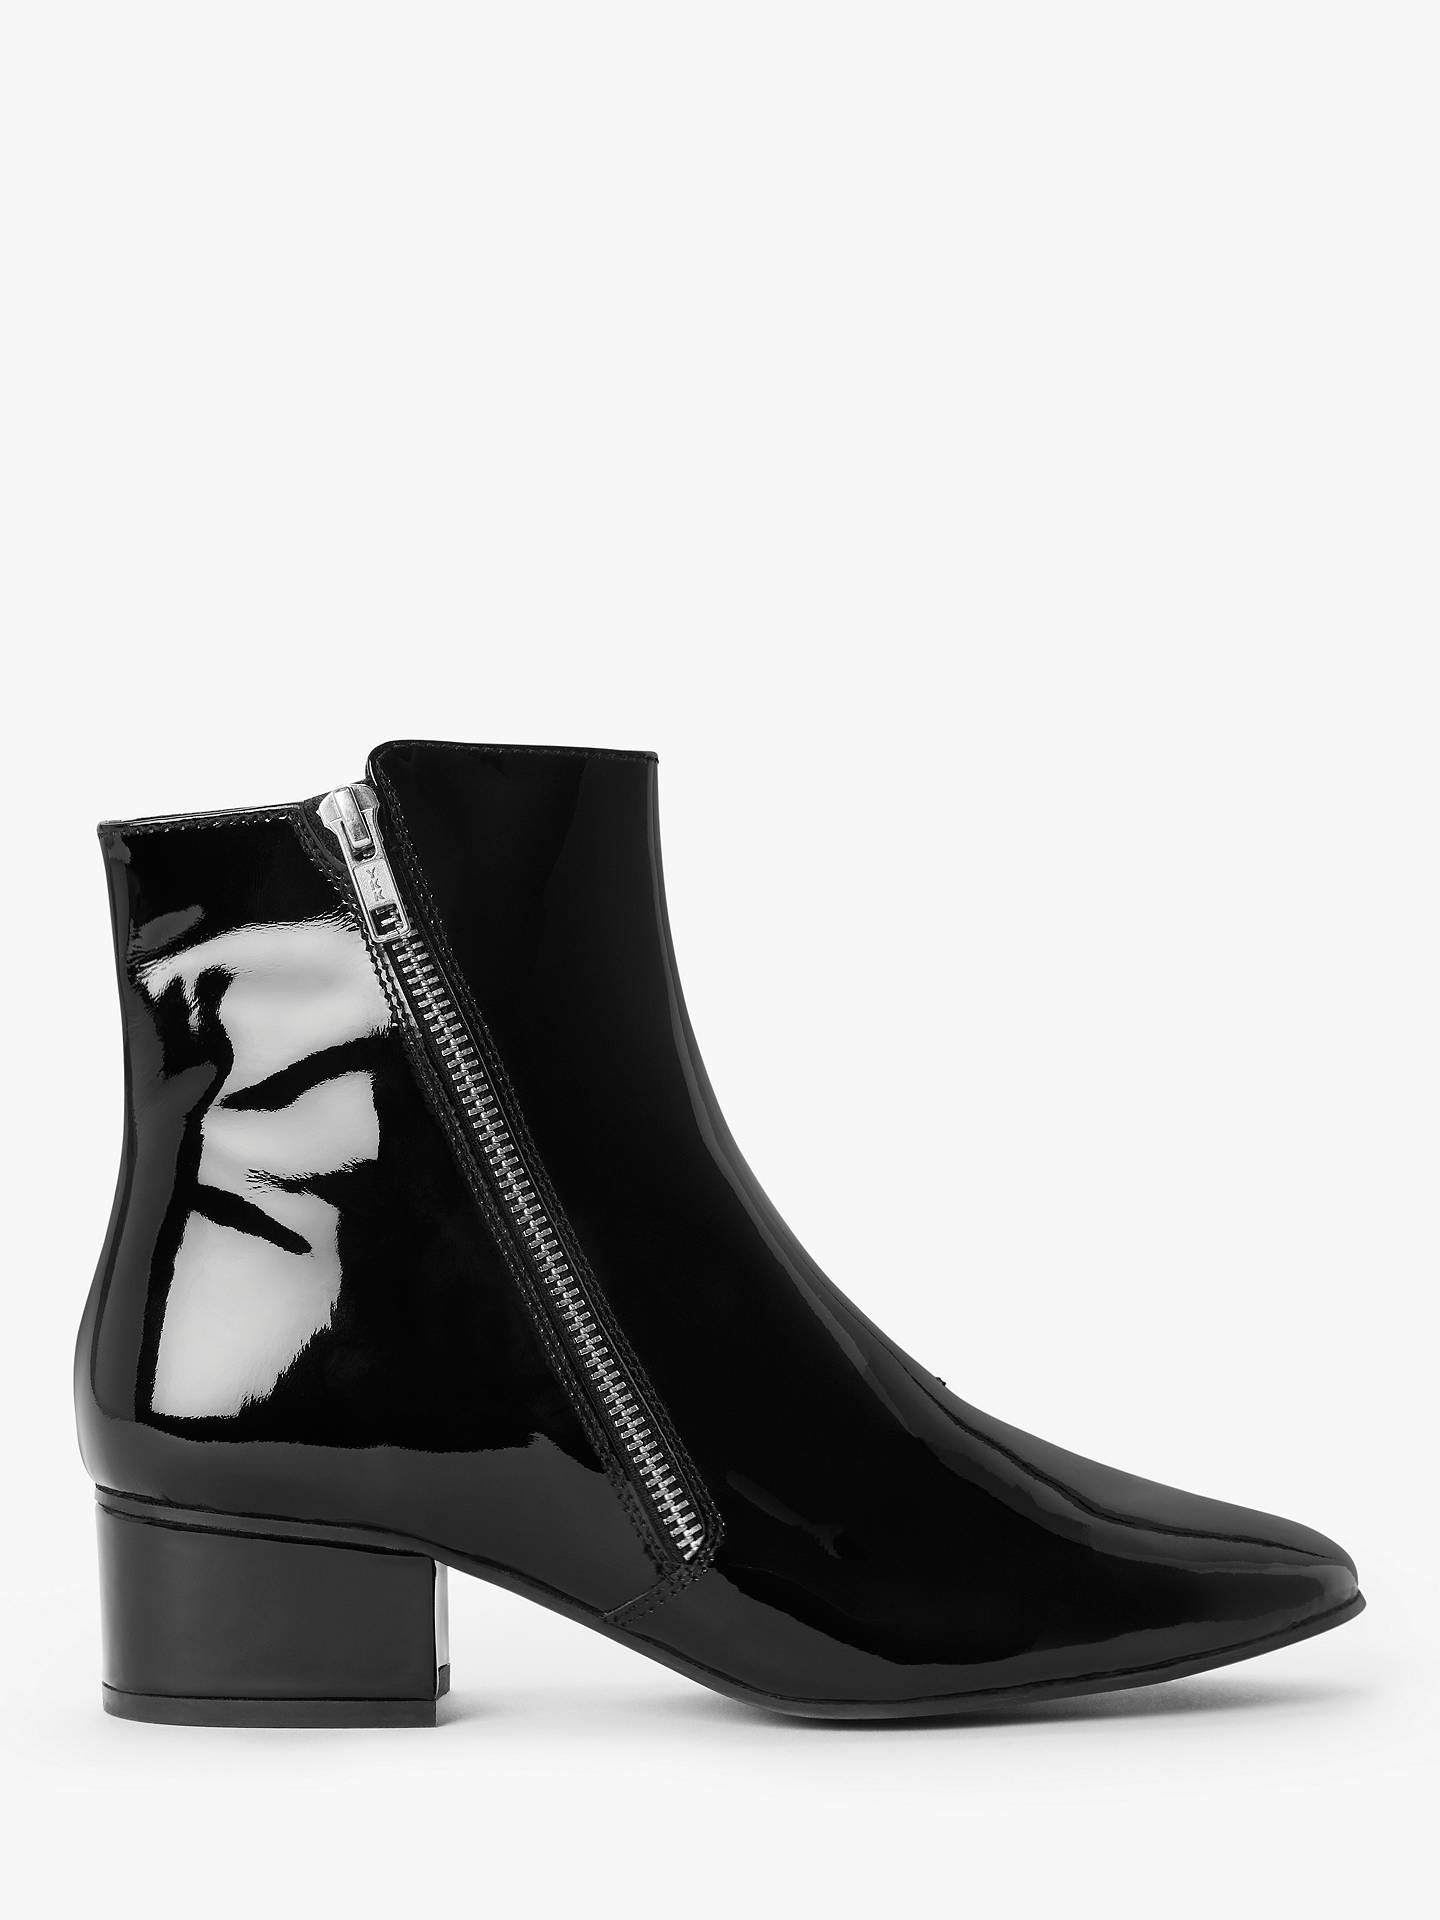 Kin Pepper Patent Leather Ankle Boots, Black at John Lewis & Partners